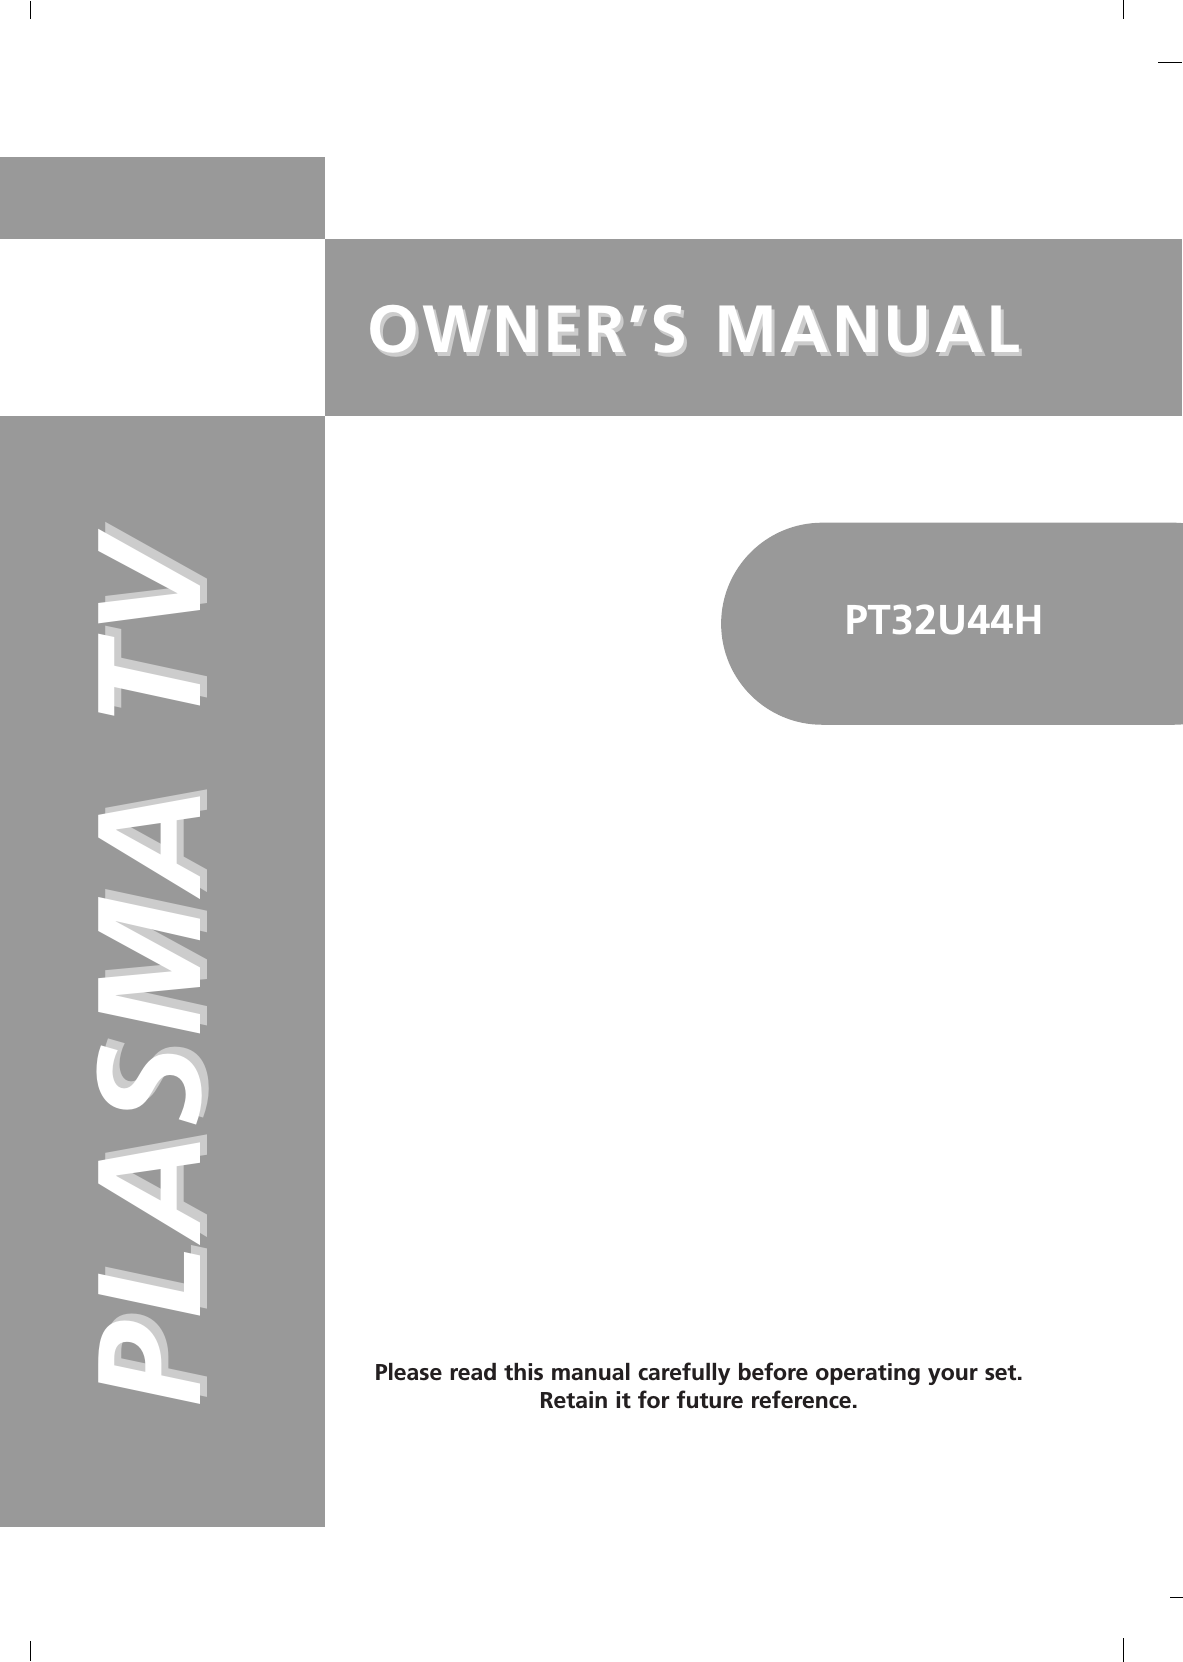 OWNER’S MANUALOWNER’S MANUALPLASMA TVPLASMA TVPlease read this manual carefully before operating your set.Retain it for future reference.PT32U44H